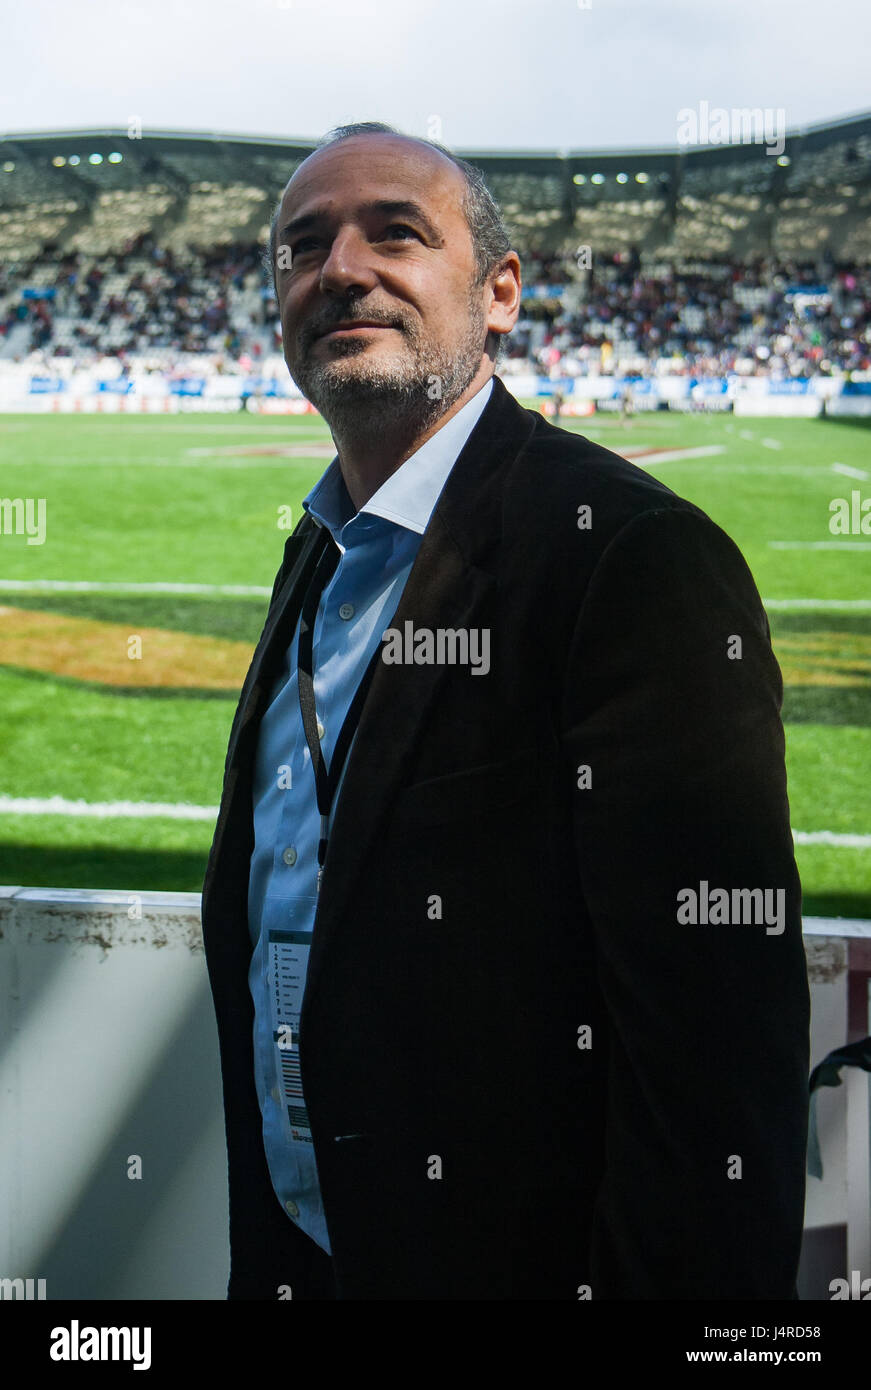 Paris, France. 14th May 2017. Stade Francais Paris President, Thomas Savare, during the players parade of the Challenge Cup trophy around their home ground, Stade Jean Bouin. They beat Gloucester 25 - 17 in Murrayfield, Scotland to clinch the trophy. Credit: Elsie Kibue / Alamy Live News Stock Photo